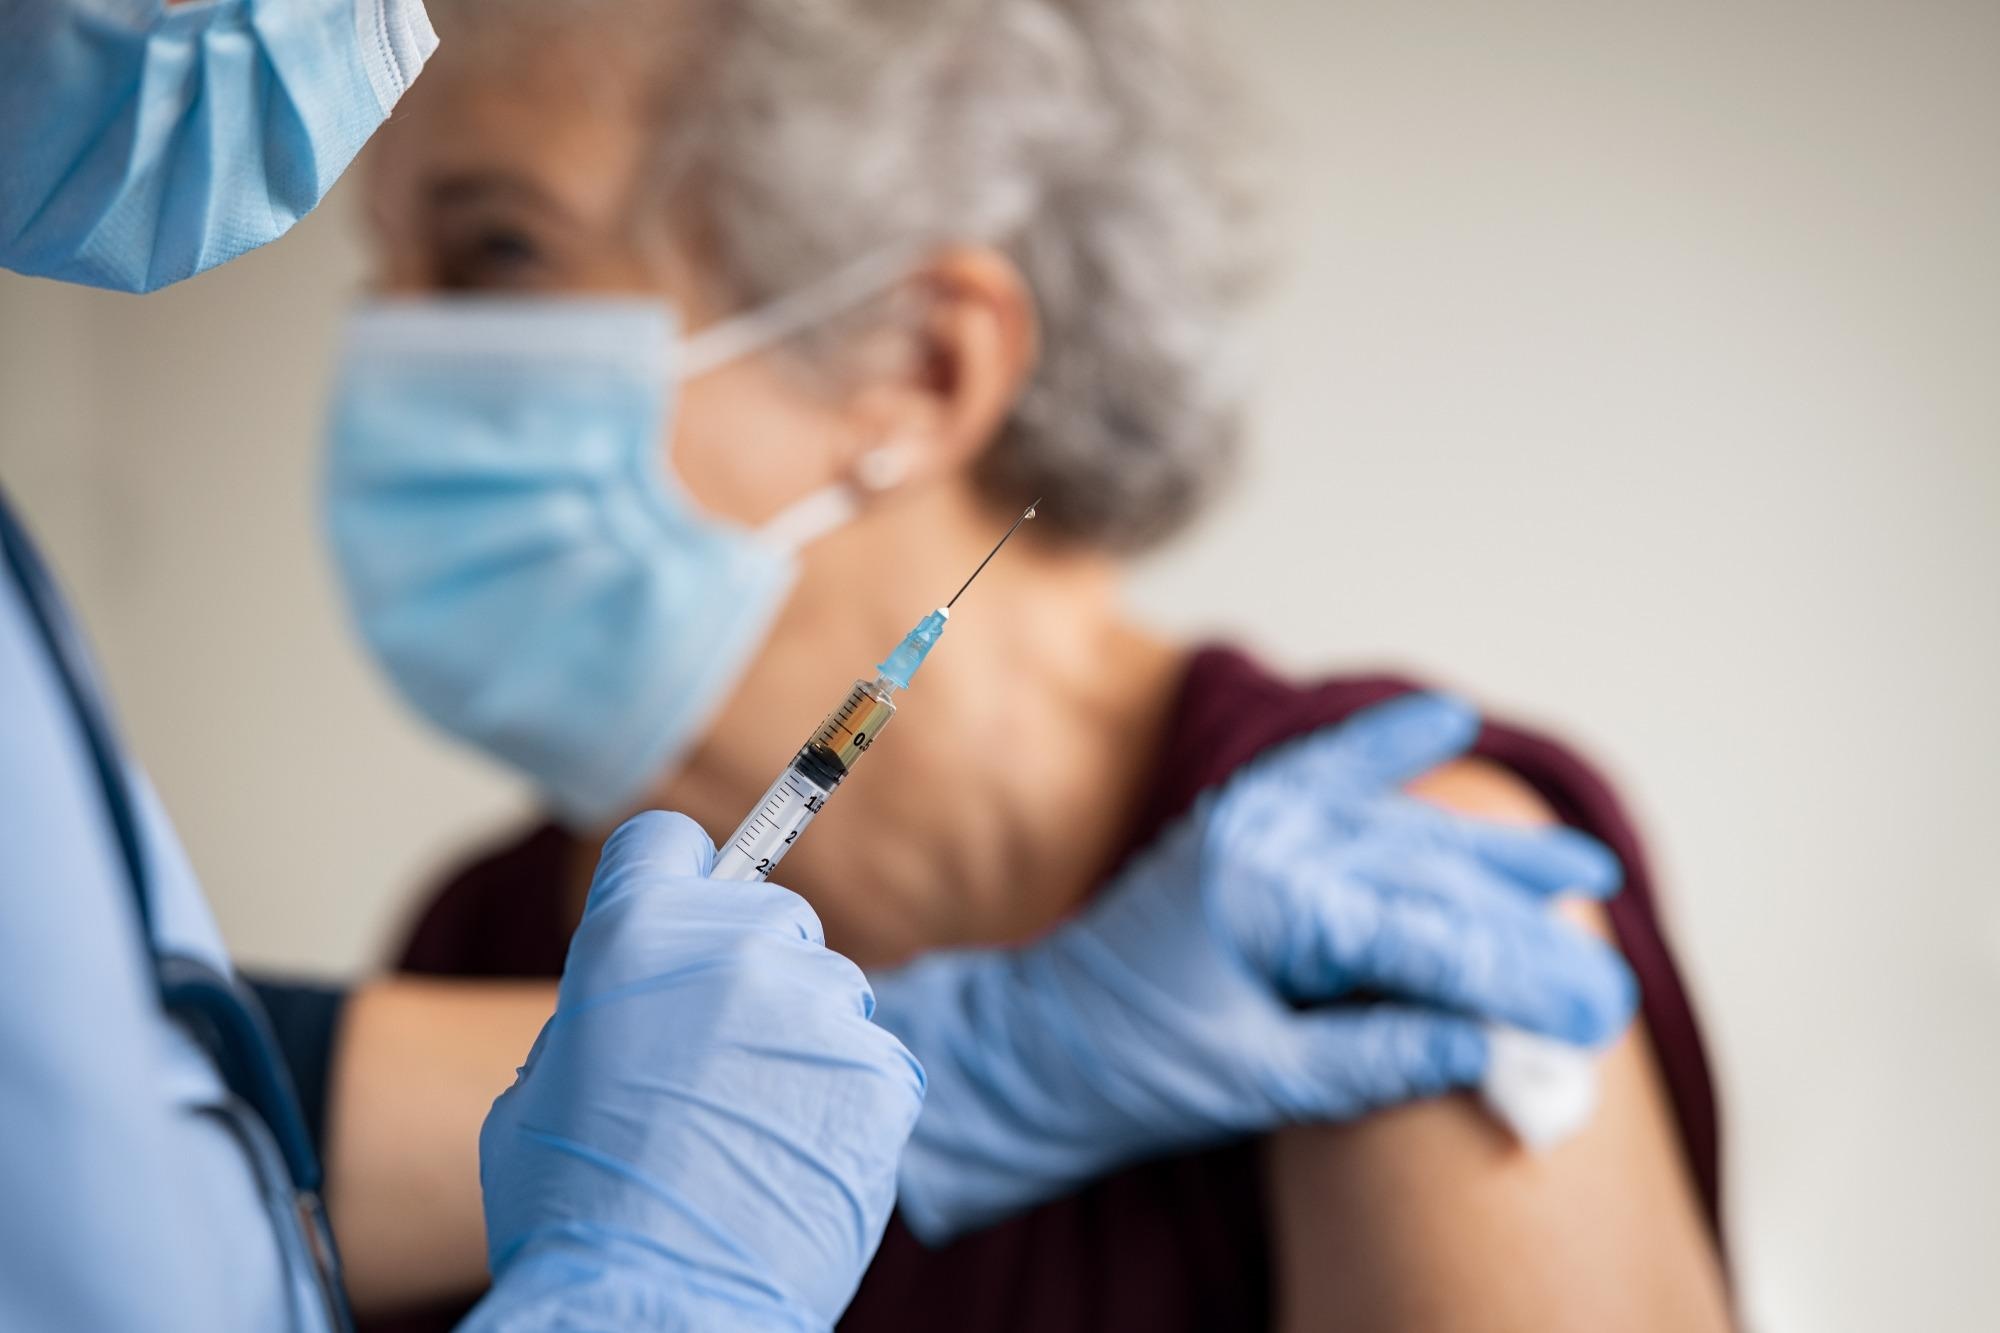 Study: Durability of Protection Against Symptomatic COVID-19 Among Participants of the mRNA-1273 SARS-CoV-2 Vaccine Trial. Image Credit: Rido / Shutterstock